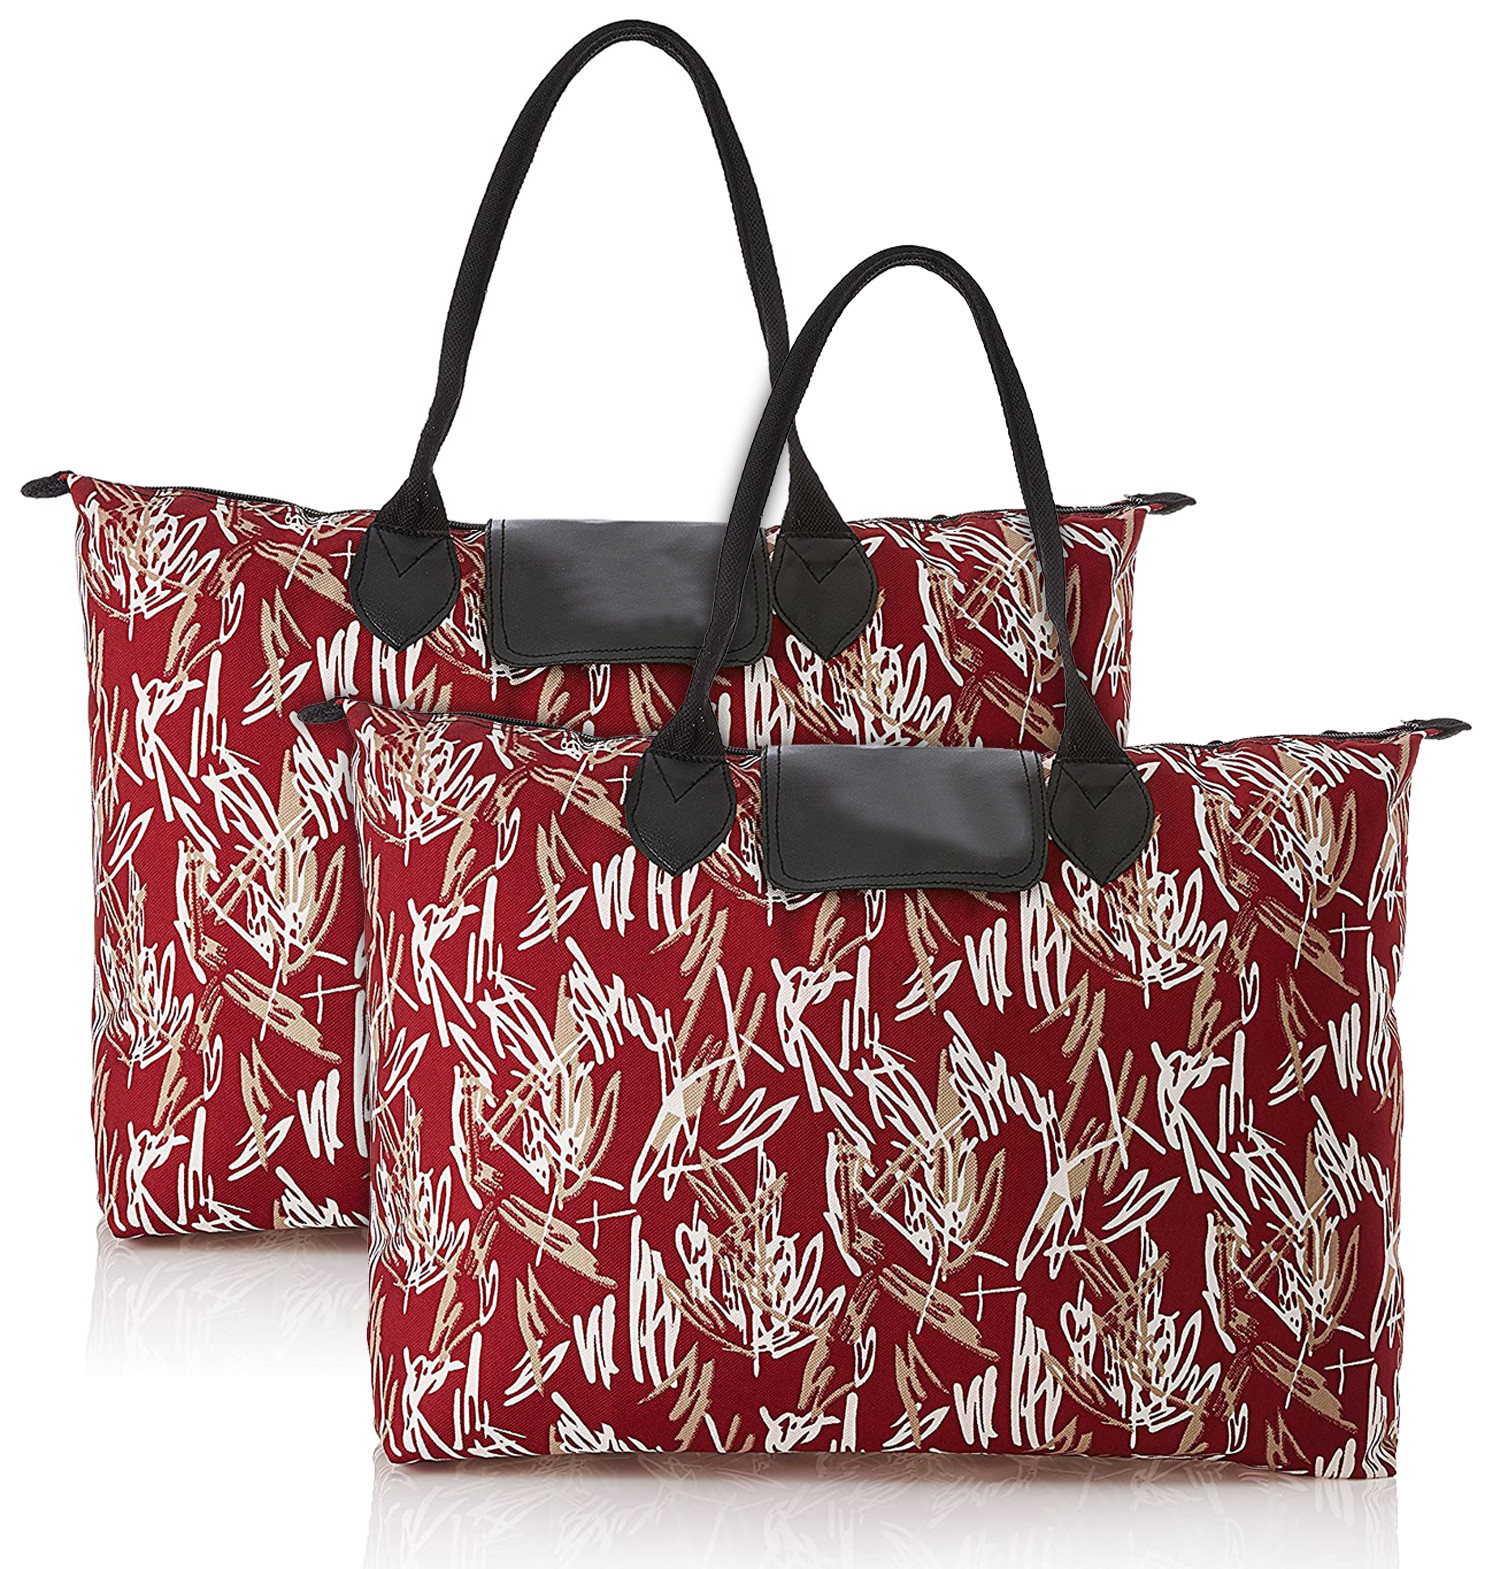 Kuber Industries Rexien Shopping Bags for Carry Milk Grocery Fruits Vegetable with Reinforced Handles jhola Bag (Maroon)